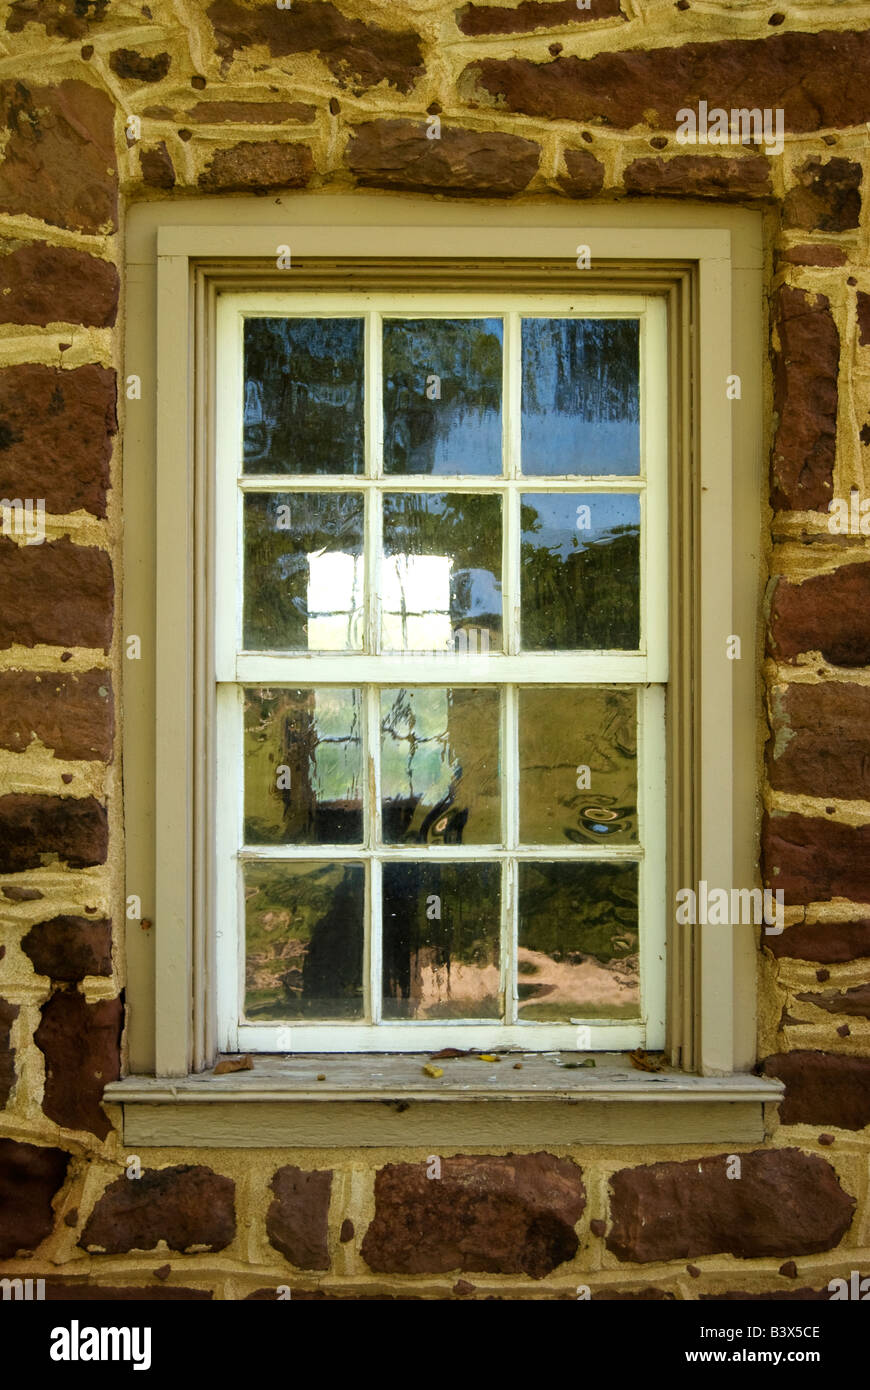 Thick sagging glass in window Stock Photo - Alamy